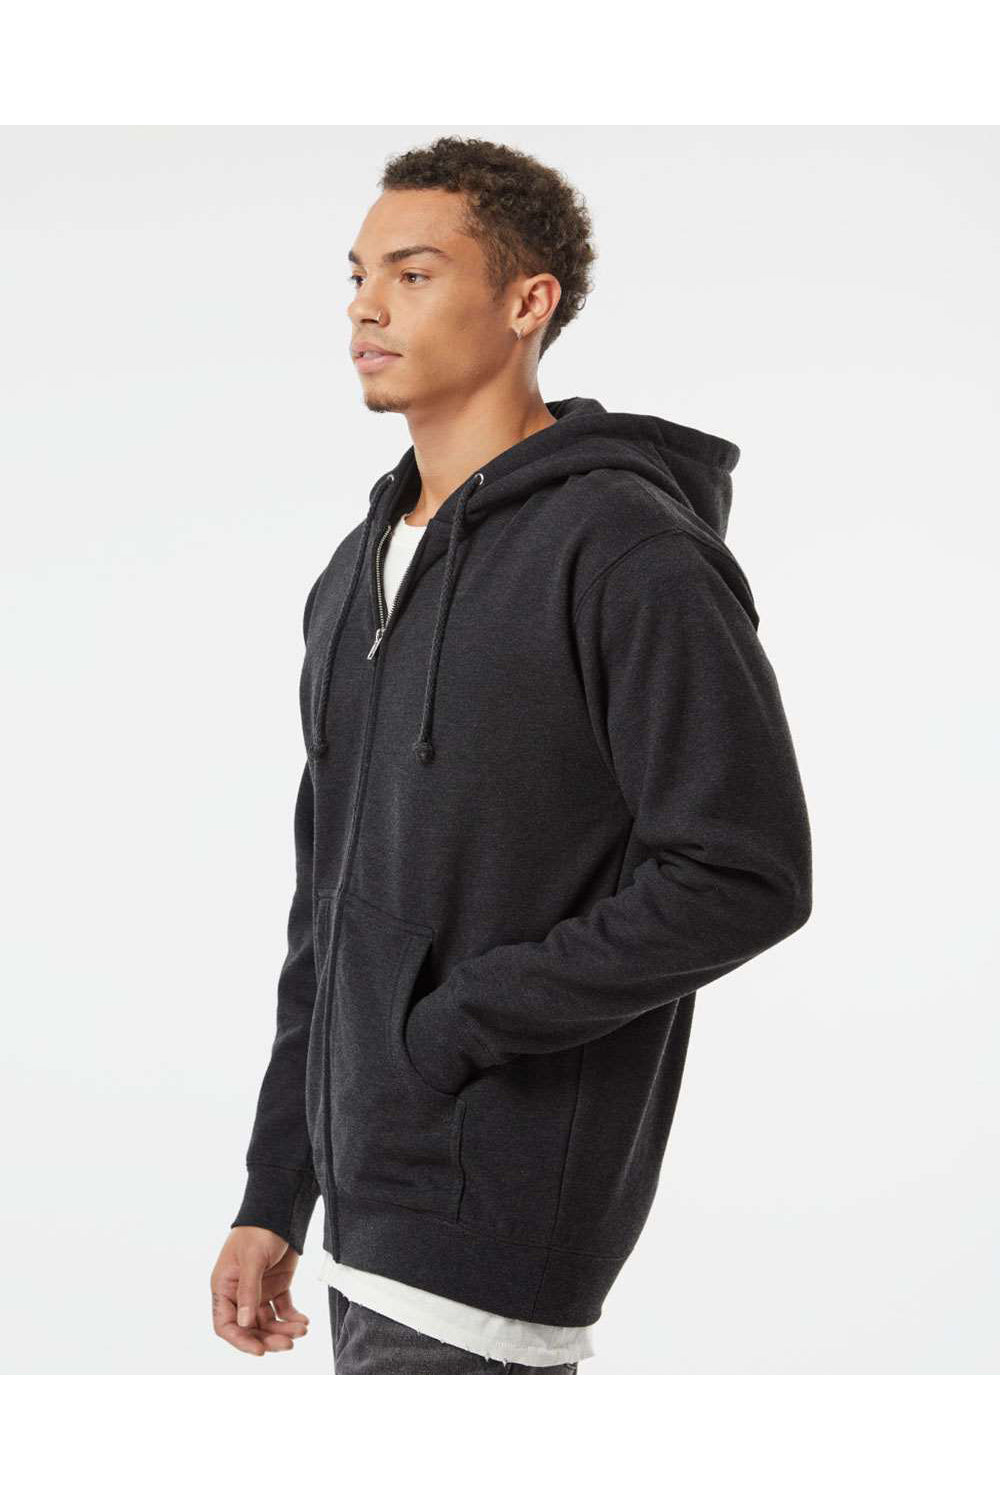 Independent Trading Co. IND4000Z Mens Full Zip Hooded Sweatshirt Hoodie Heather Charcoal Grey Model Side